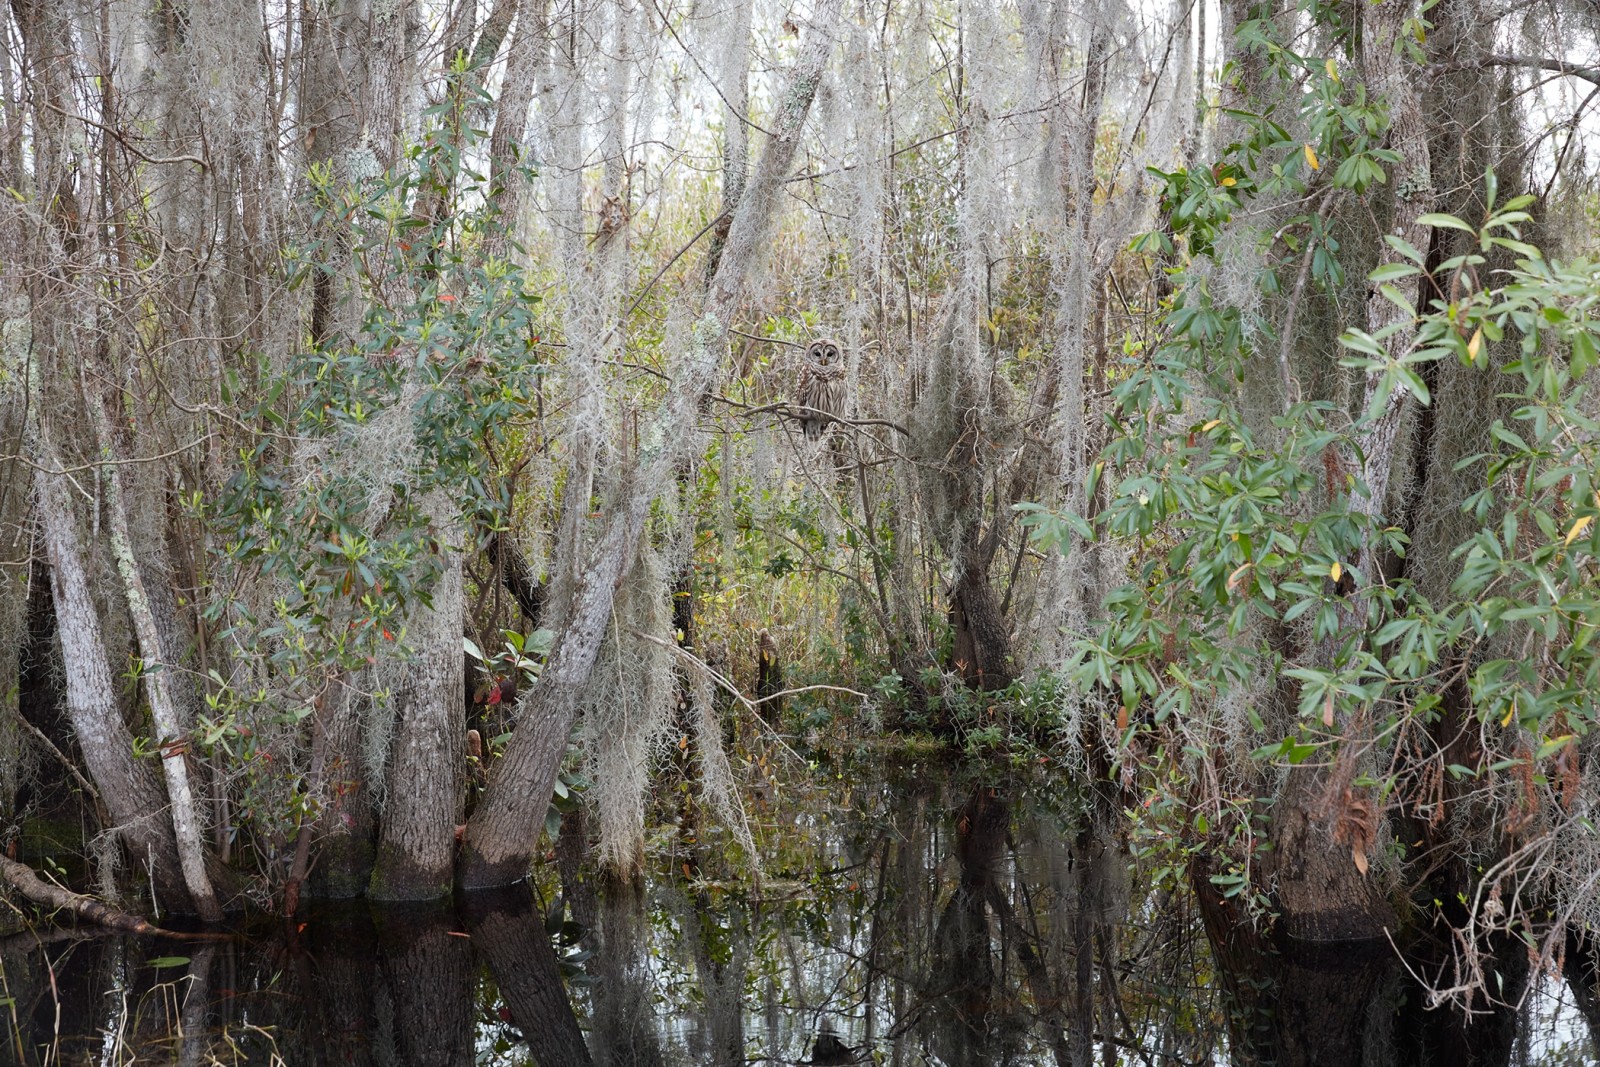 CATHERINE OPIE, Untitled #1 (Swamps), 2019